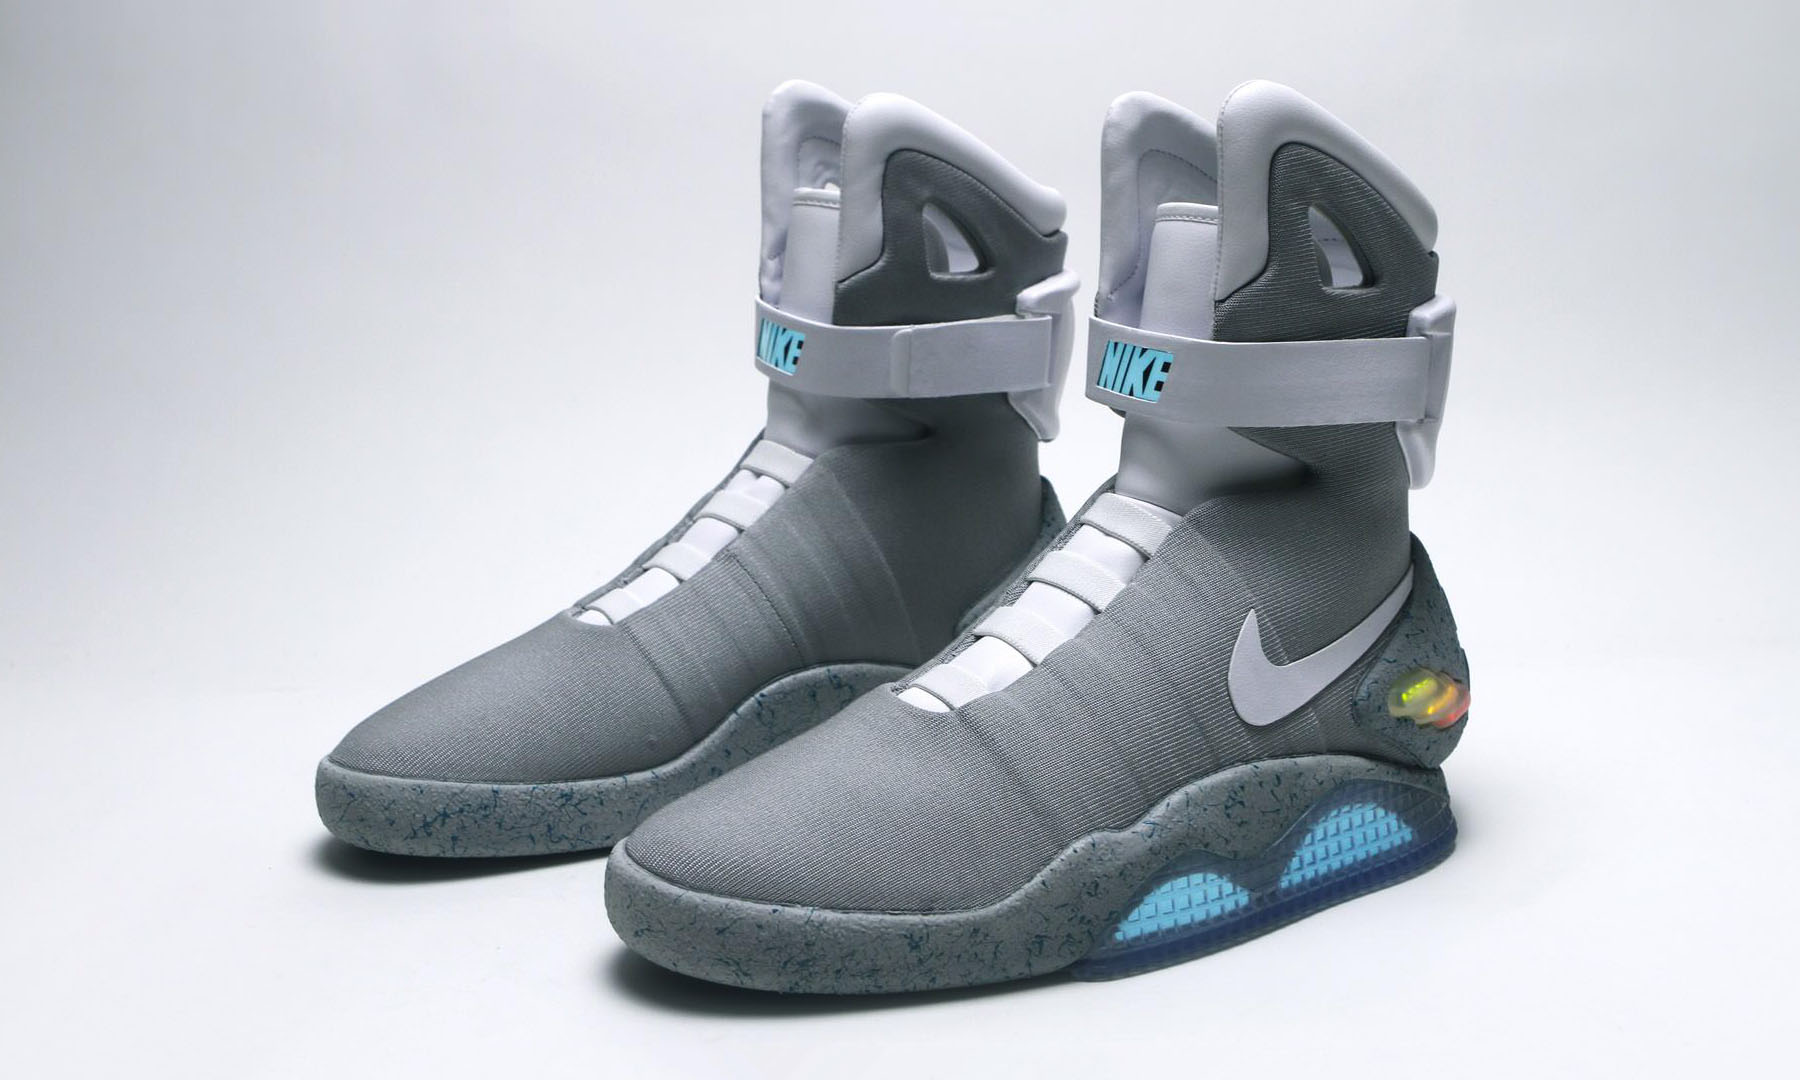 kam bloemblad versus Nike's Self-Lacing Sneakers From 'Back To The Future II' Are Real